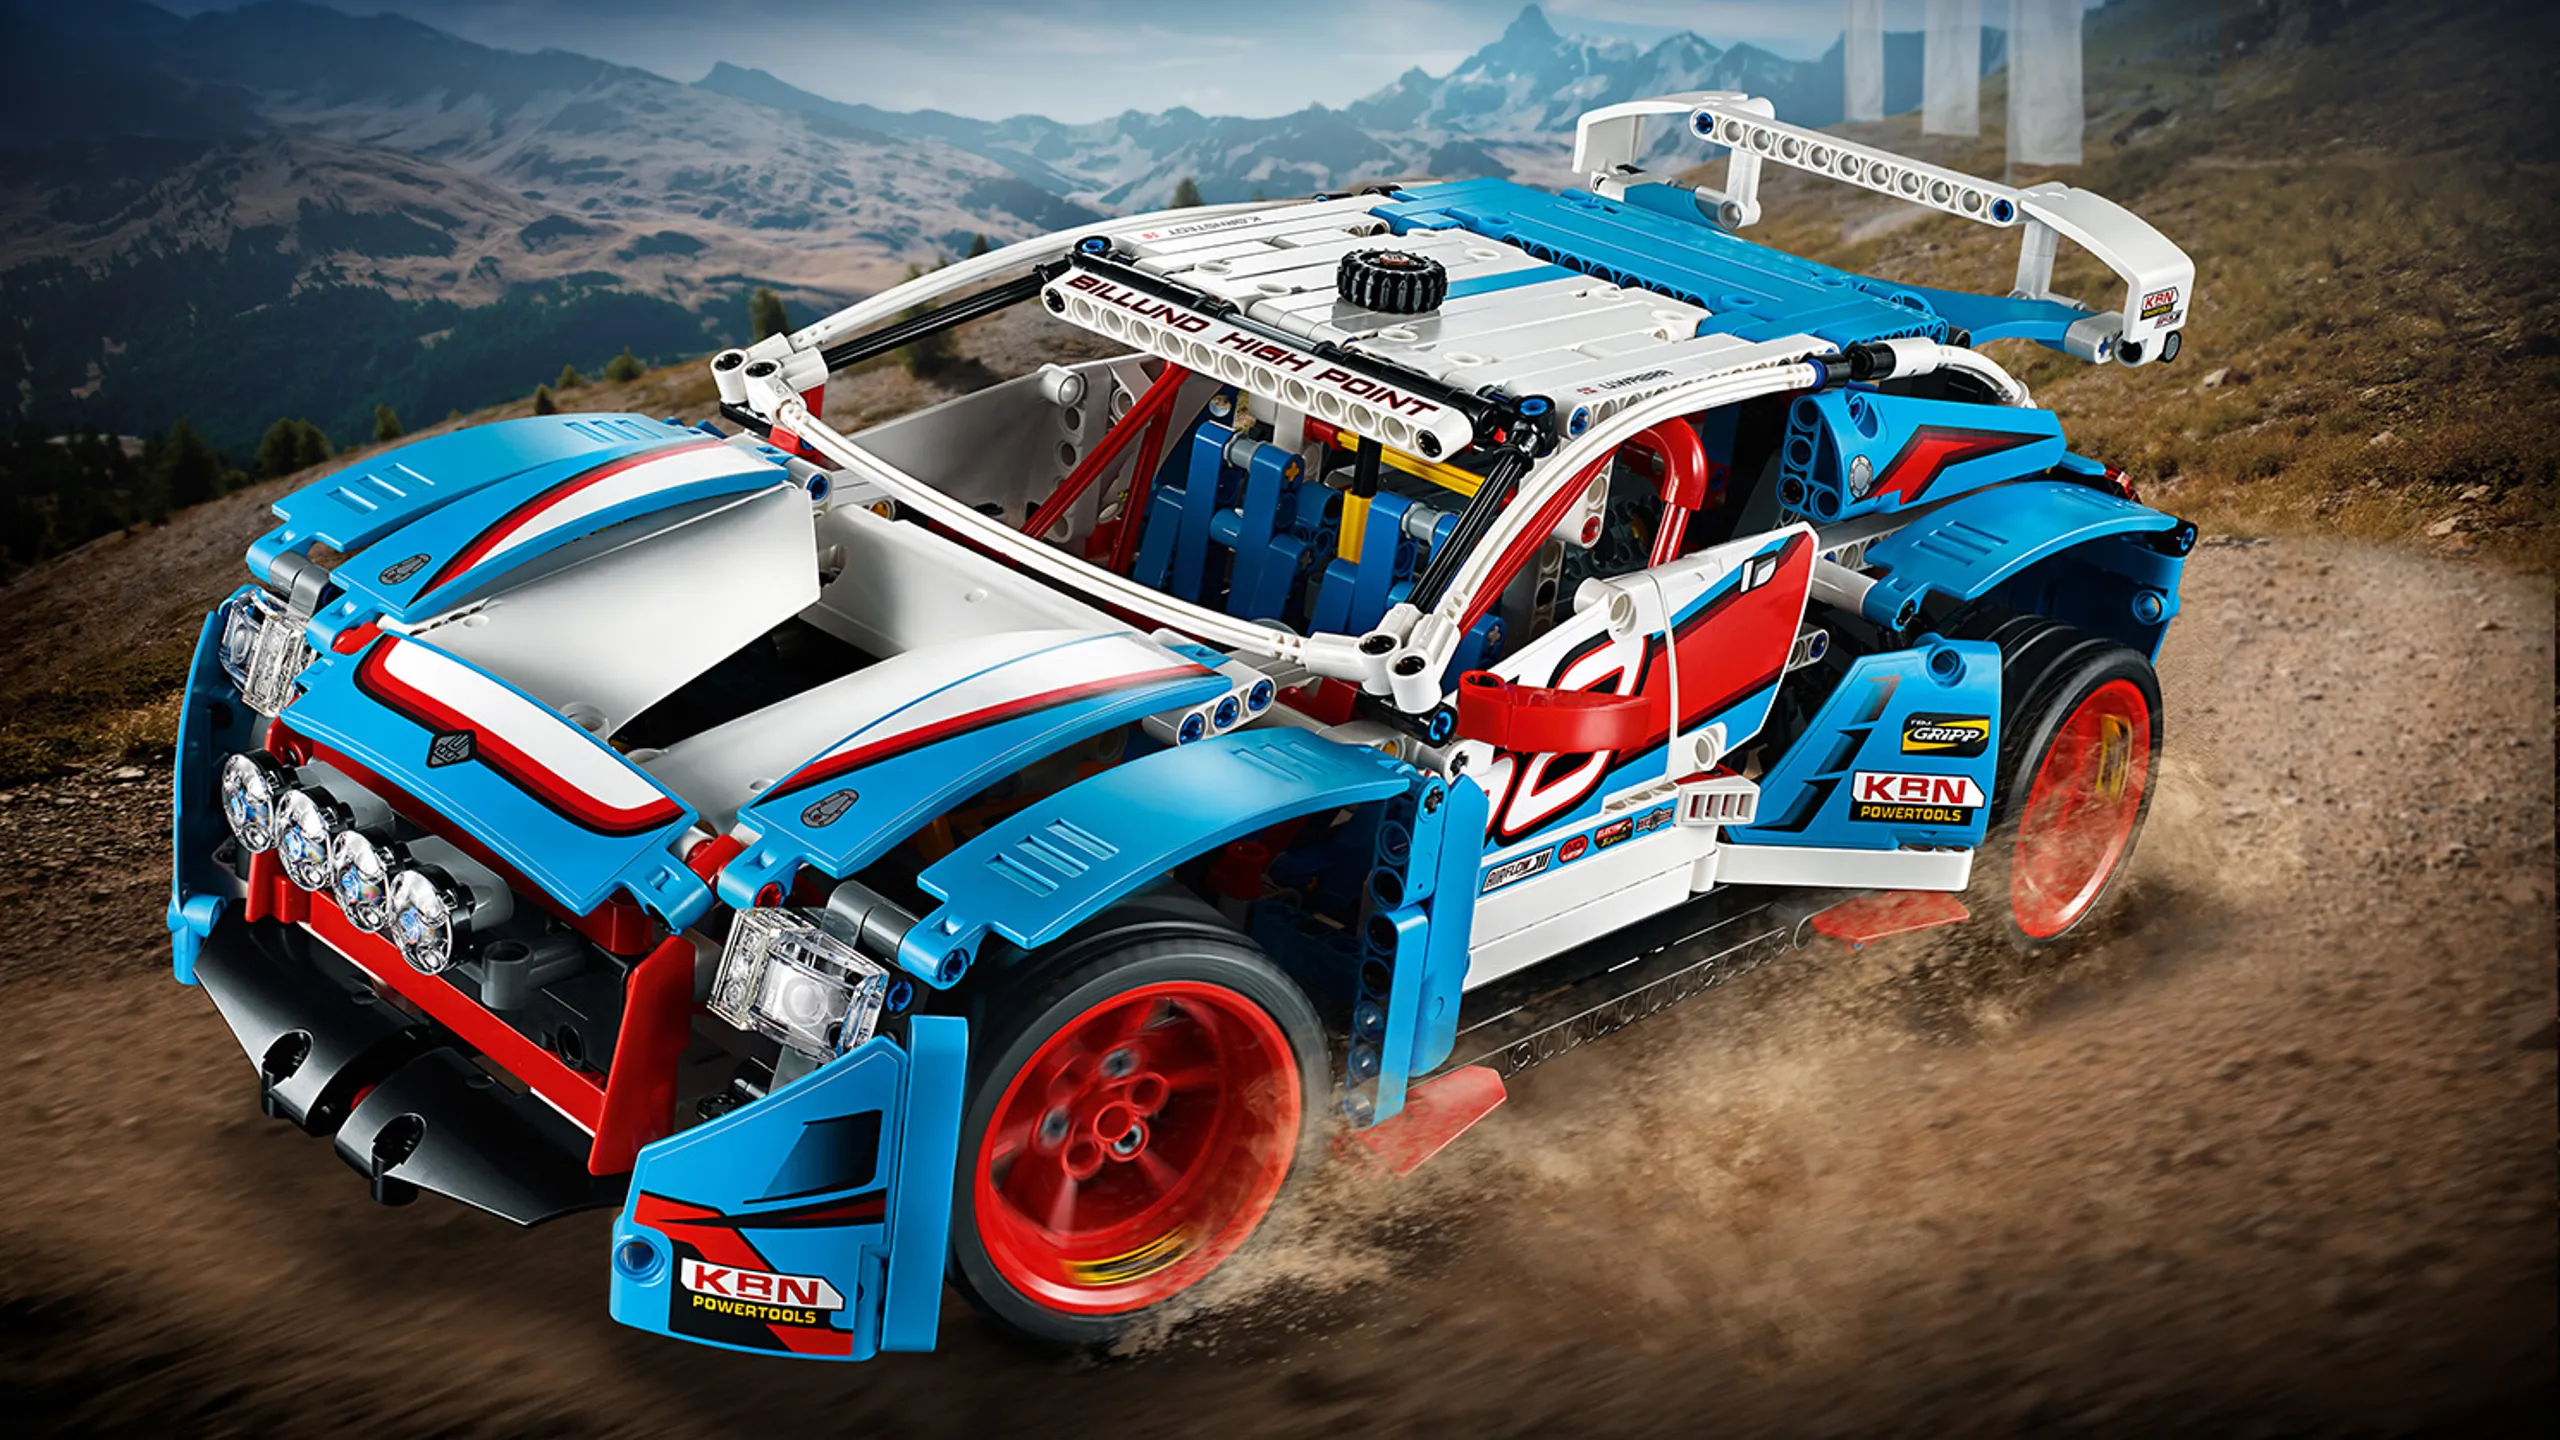 LEGO Technic - 42077 Rally Car - This Rally Car model features sporty blue, white, red and black bodywork with cool racing stickers, rear spoiler, 4 spot lamps and large 6-spoke red rims with low-profile, road-gripping tires.